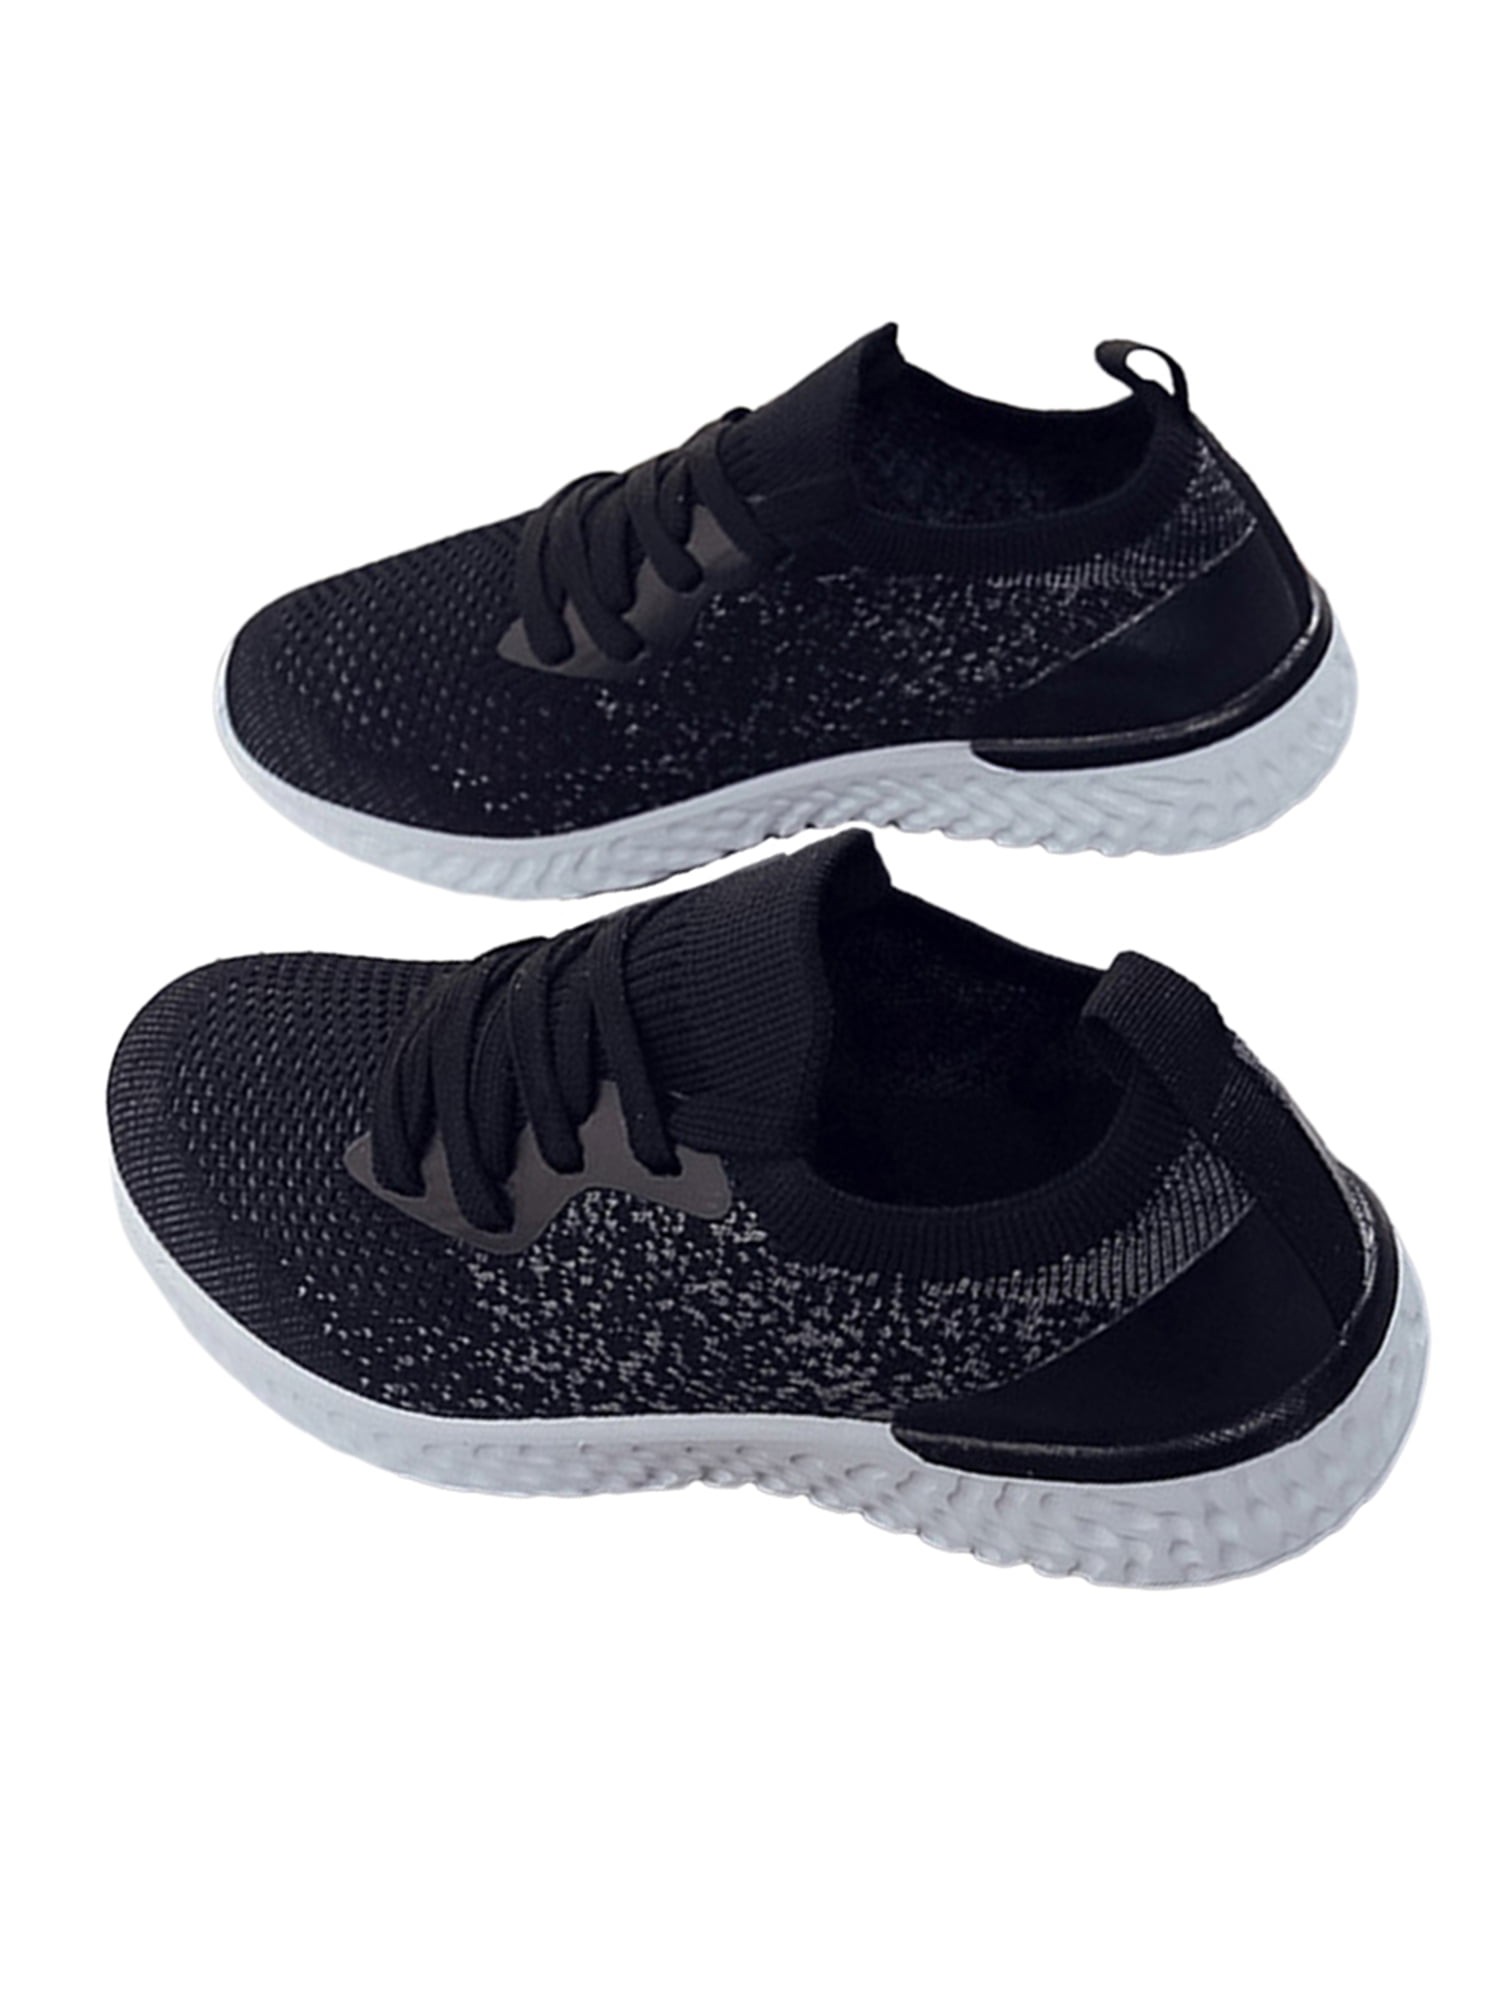 Details about   New Flat-Bottom Mesh Women's Casual Shoes Walking Shoes Non-Slip Sneakers 